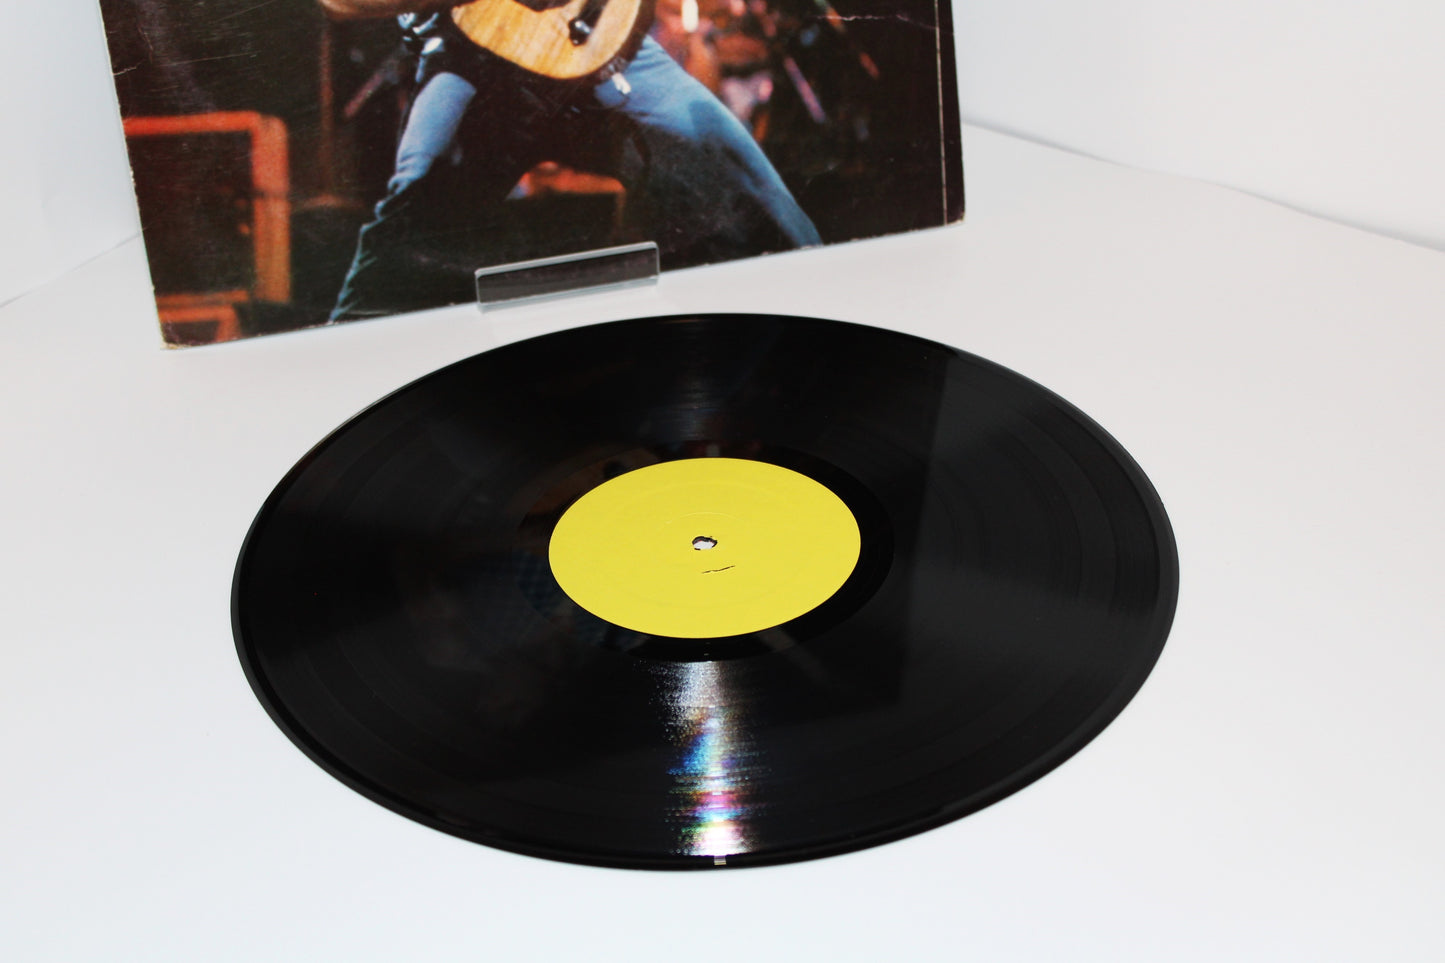 Bruce Springsteen "With A Little Help From My Friends" bootleg vinyl - Bob Seger, Jackson Browne + more